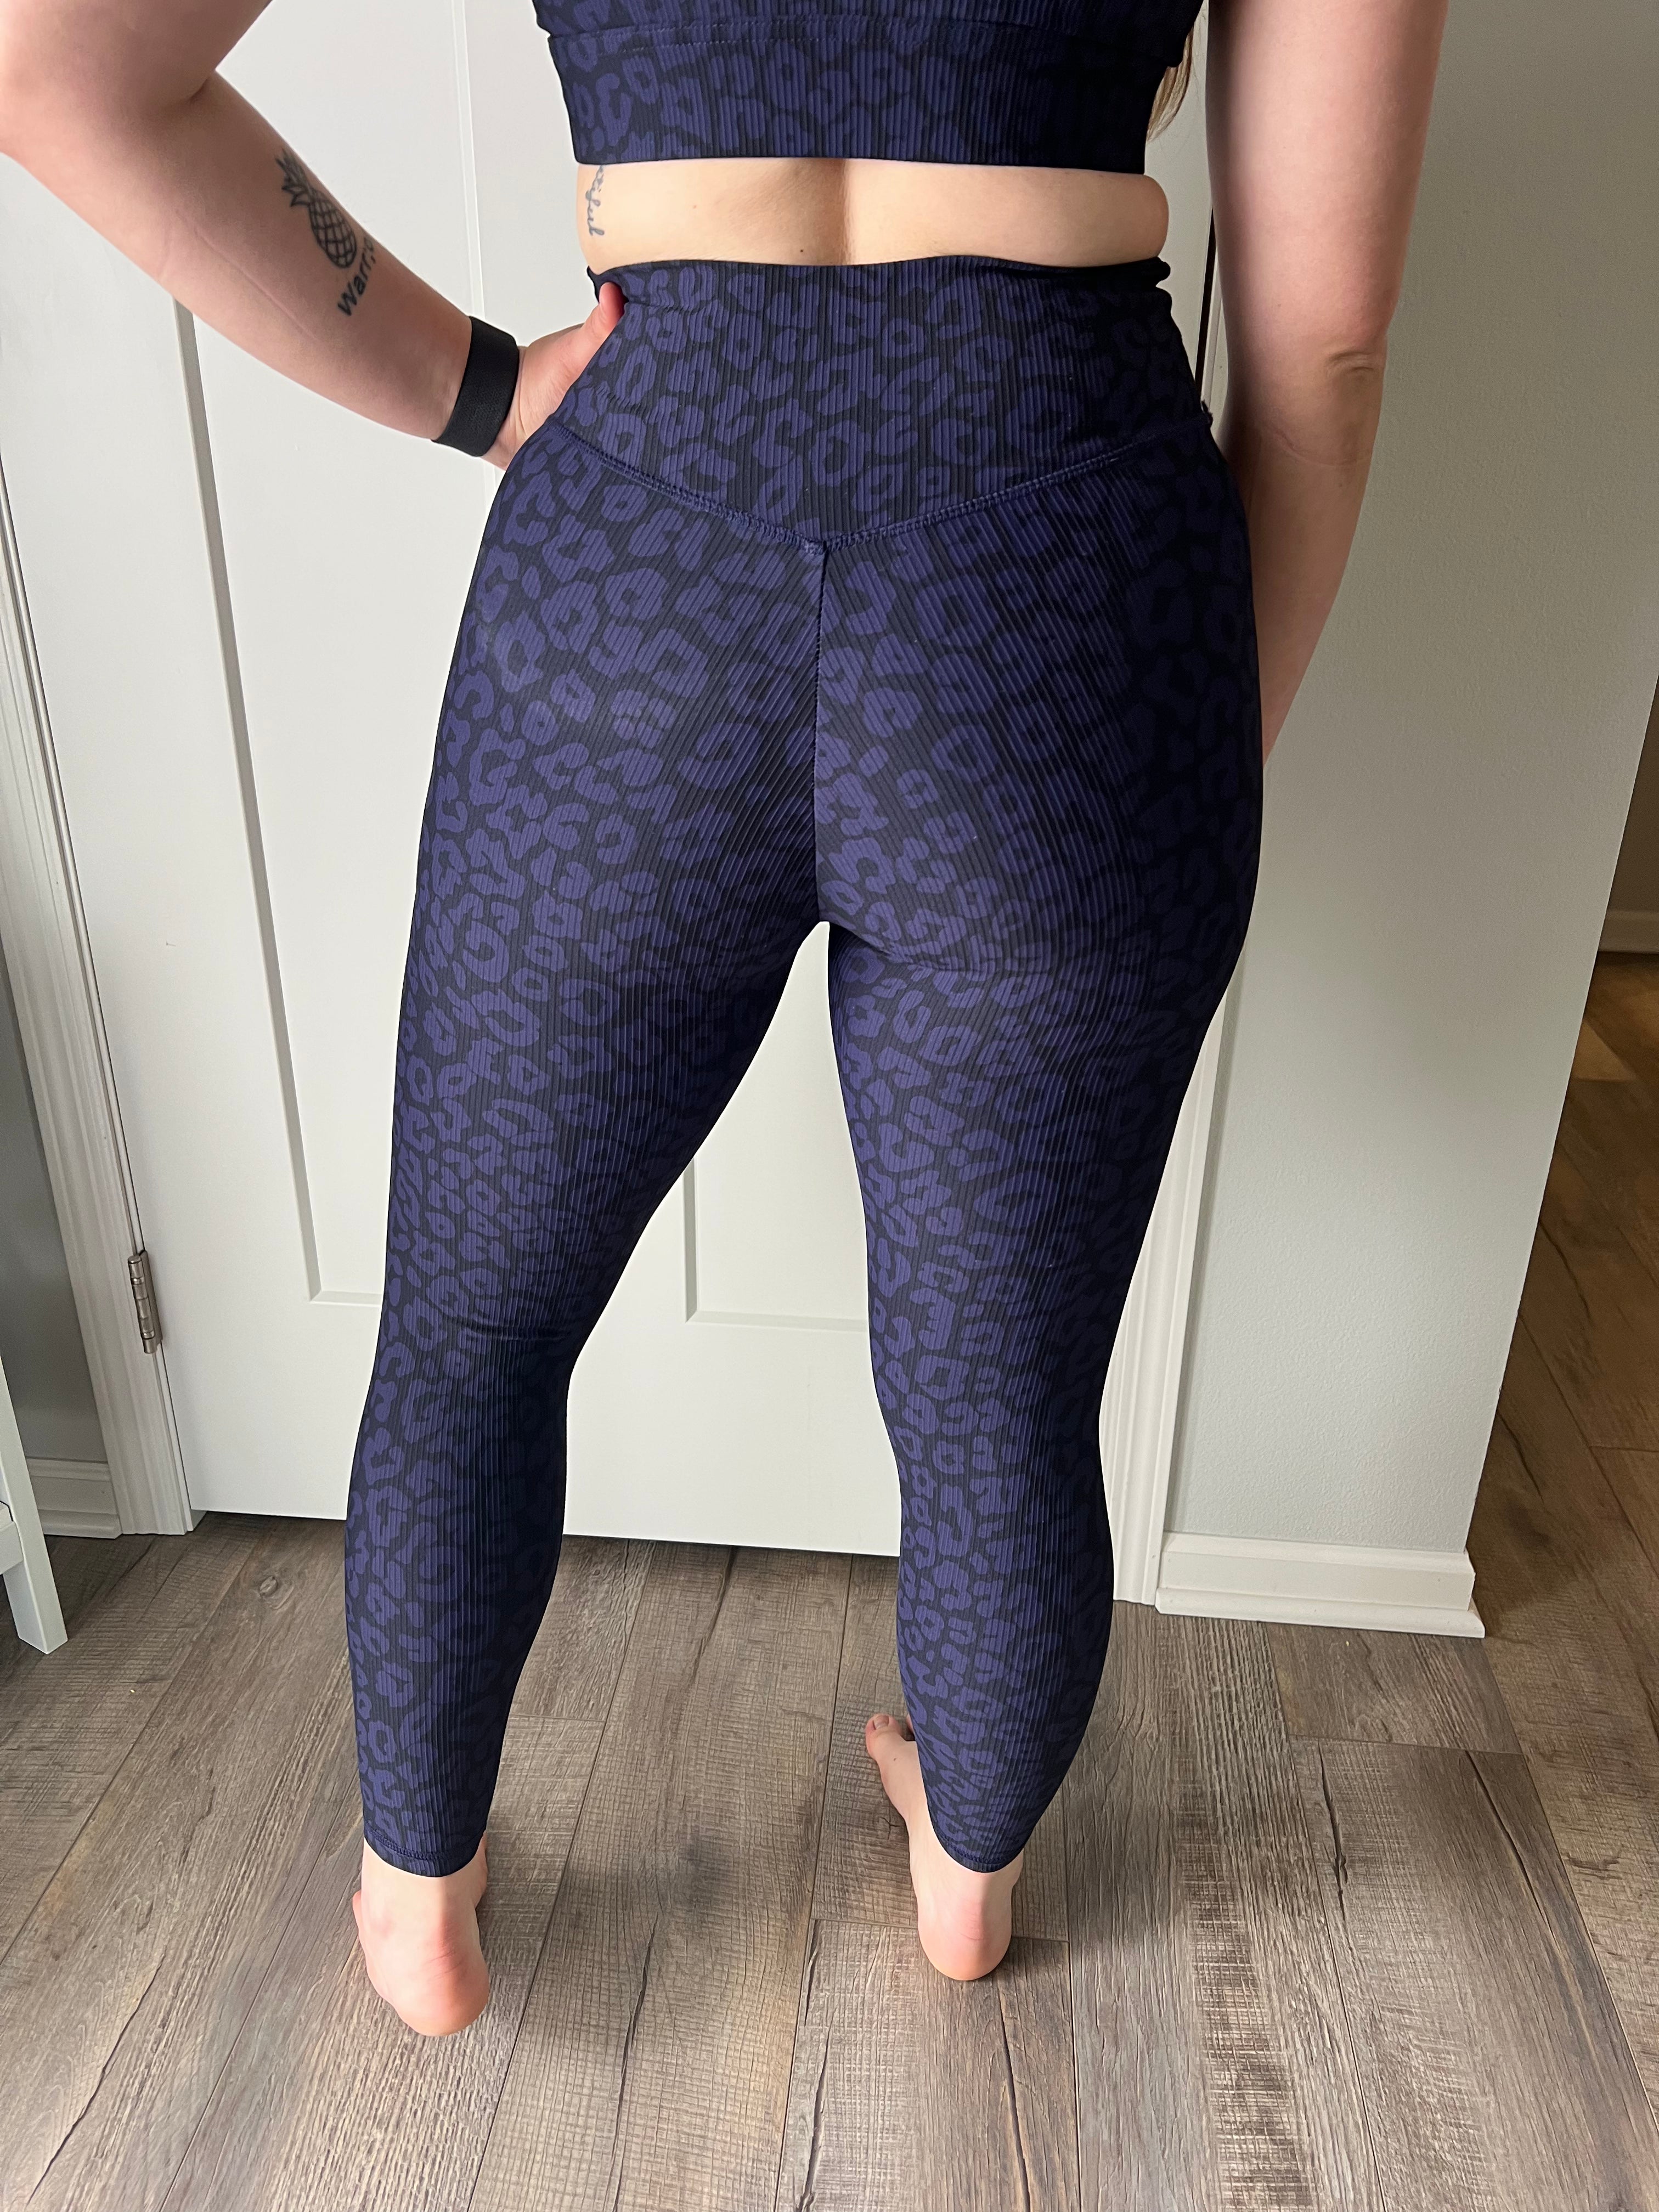 The Cleo Ribbed Leggings